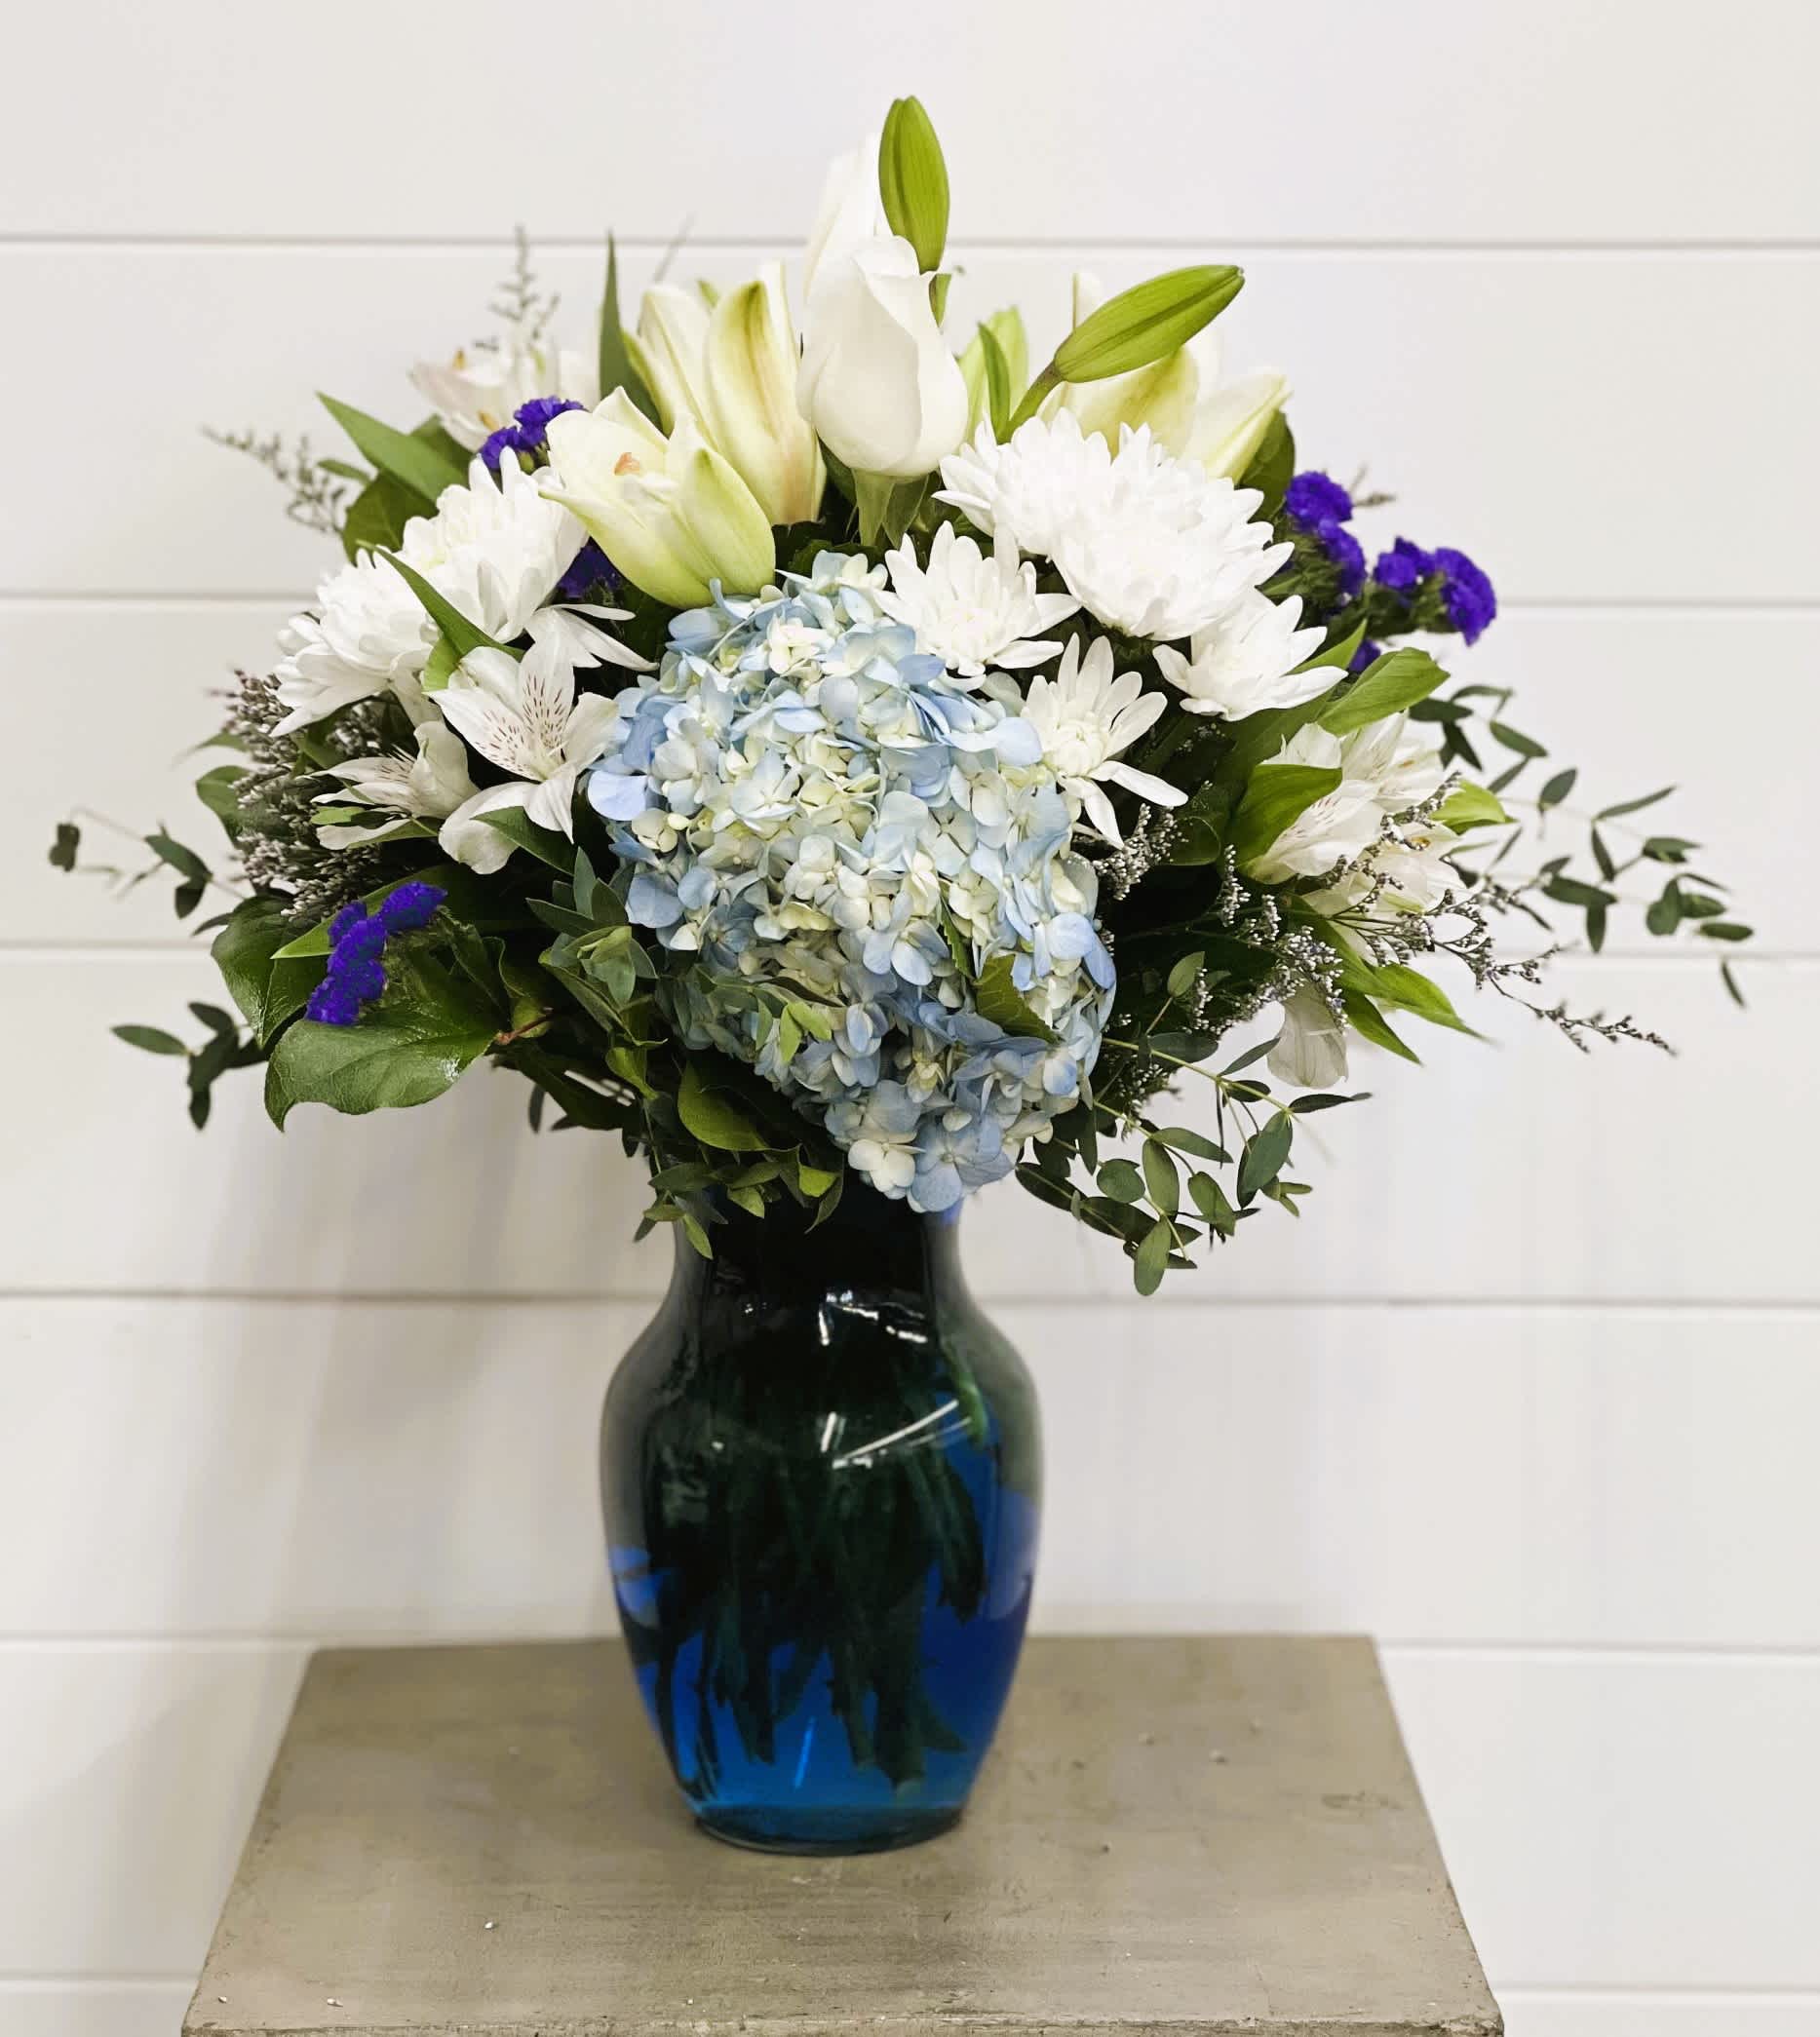 Beautiful Blues - In this arrangement the serenity of the color blue along with the purity of intention symbolized by white will let the family know you are sending your calm strength to them during these difficult times.  Flowers and colors may vary depending on availability. T209-3A